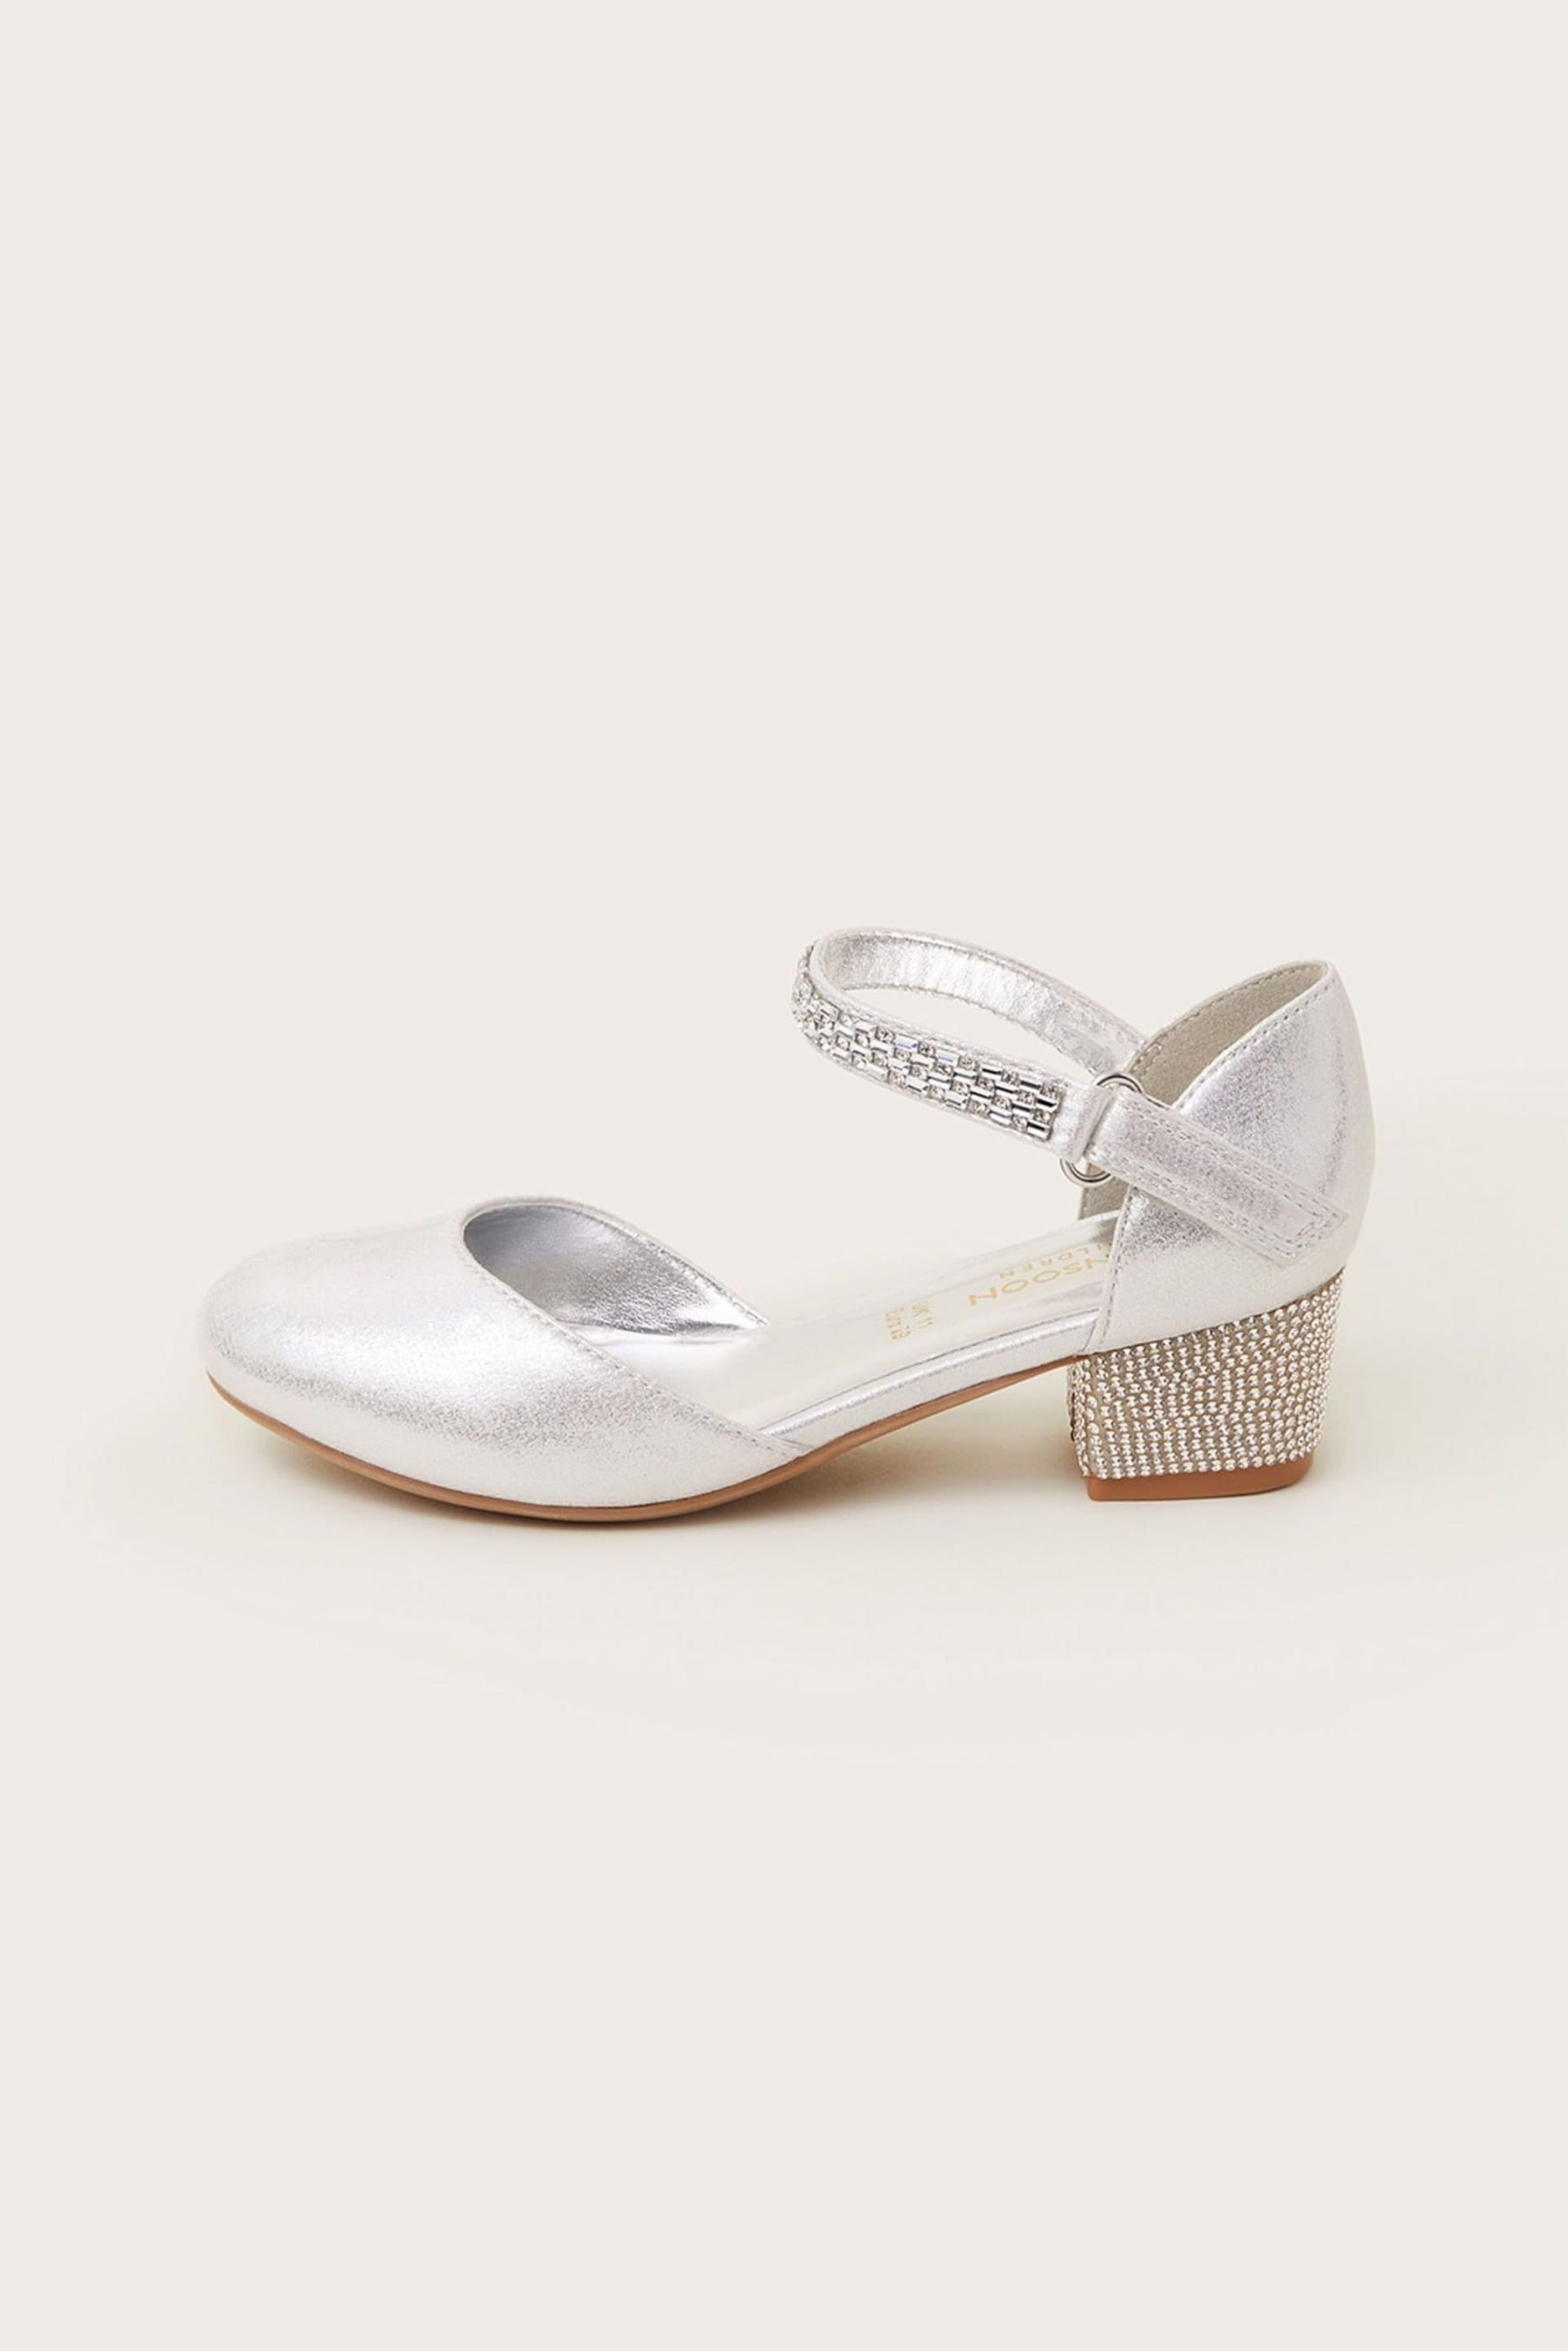 Monsoon Silver Bling Two-Part Heels - Image 2 of 3